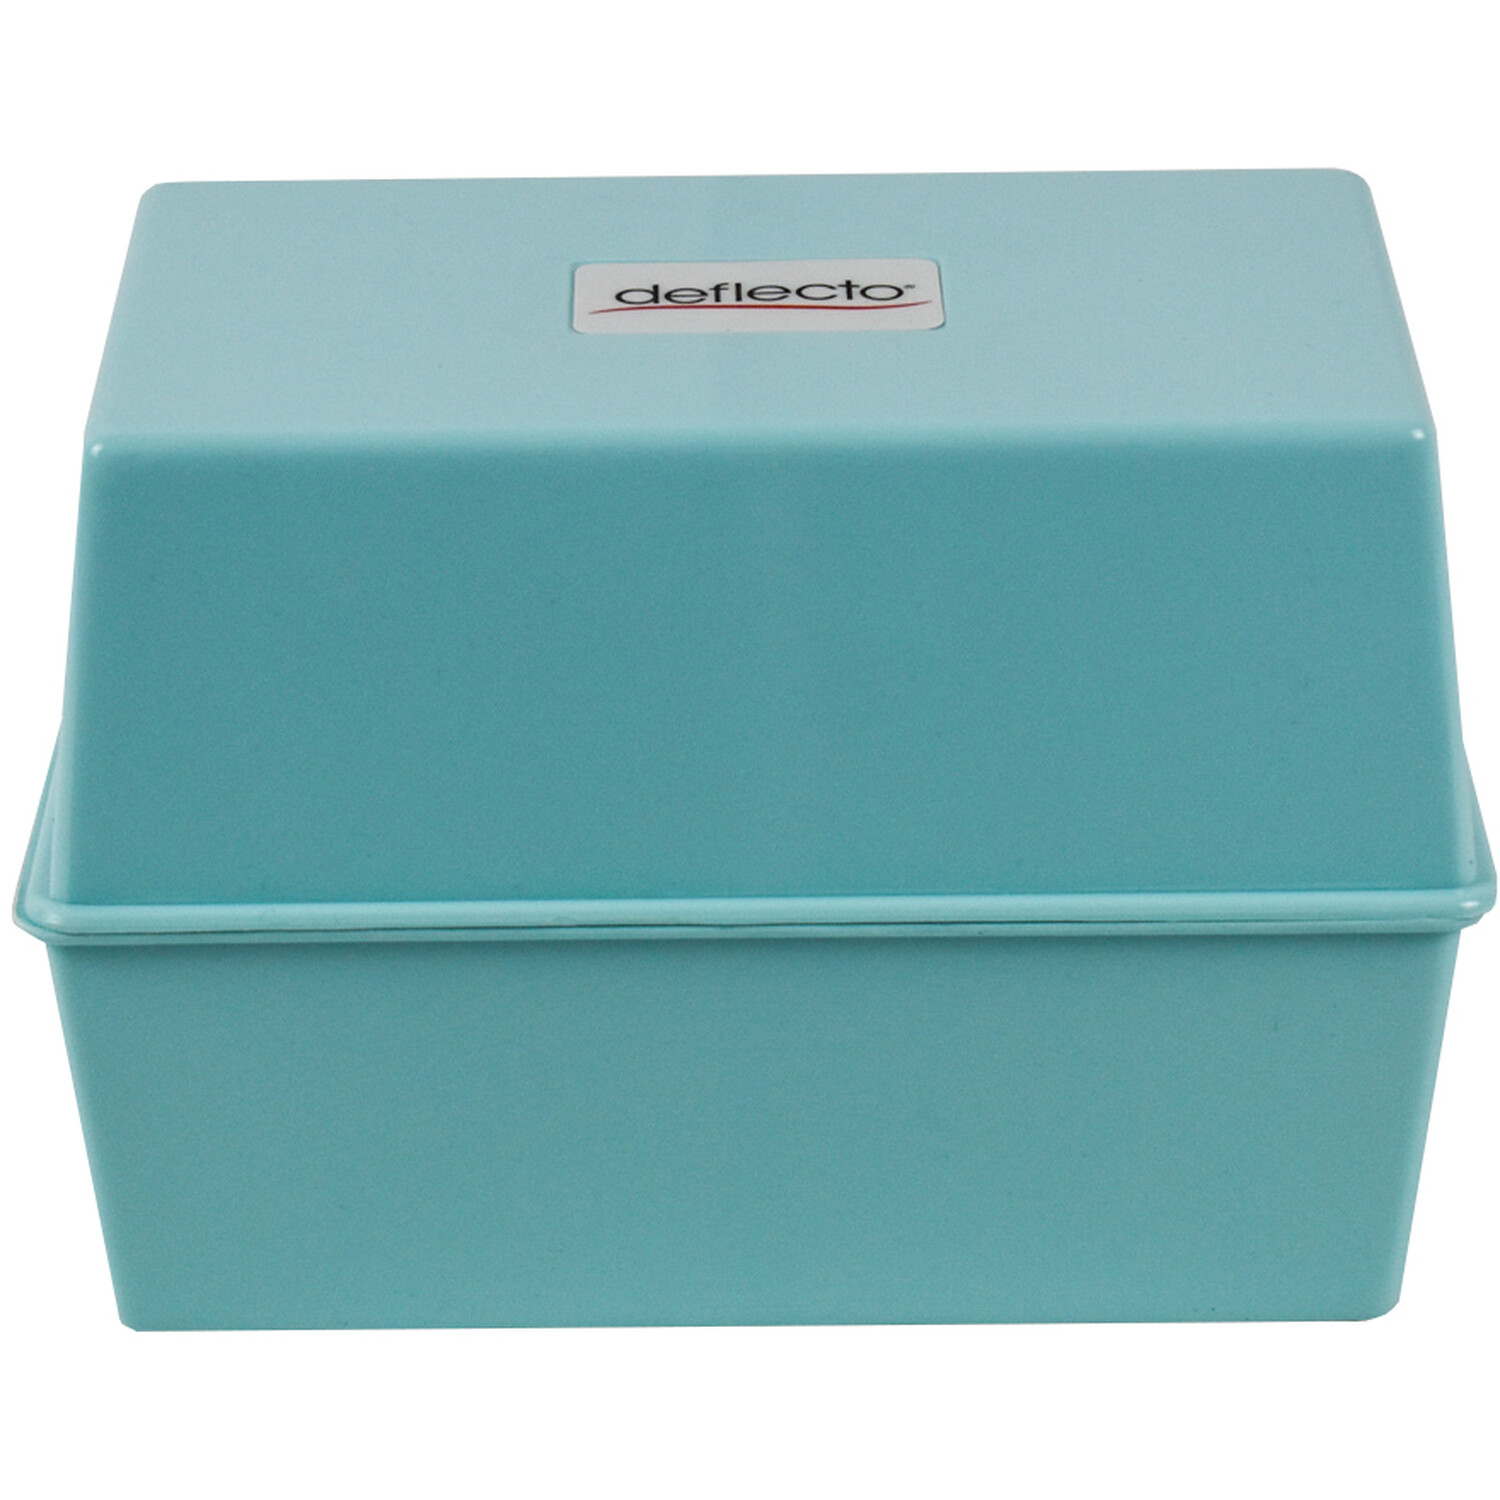 Deflecto Card Index Box - Peppermint Image 1